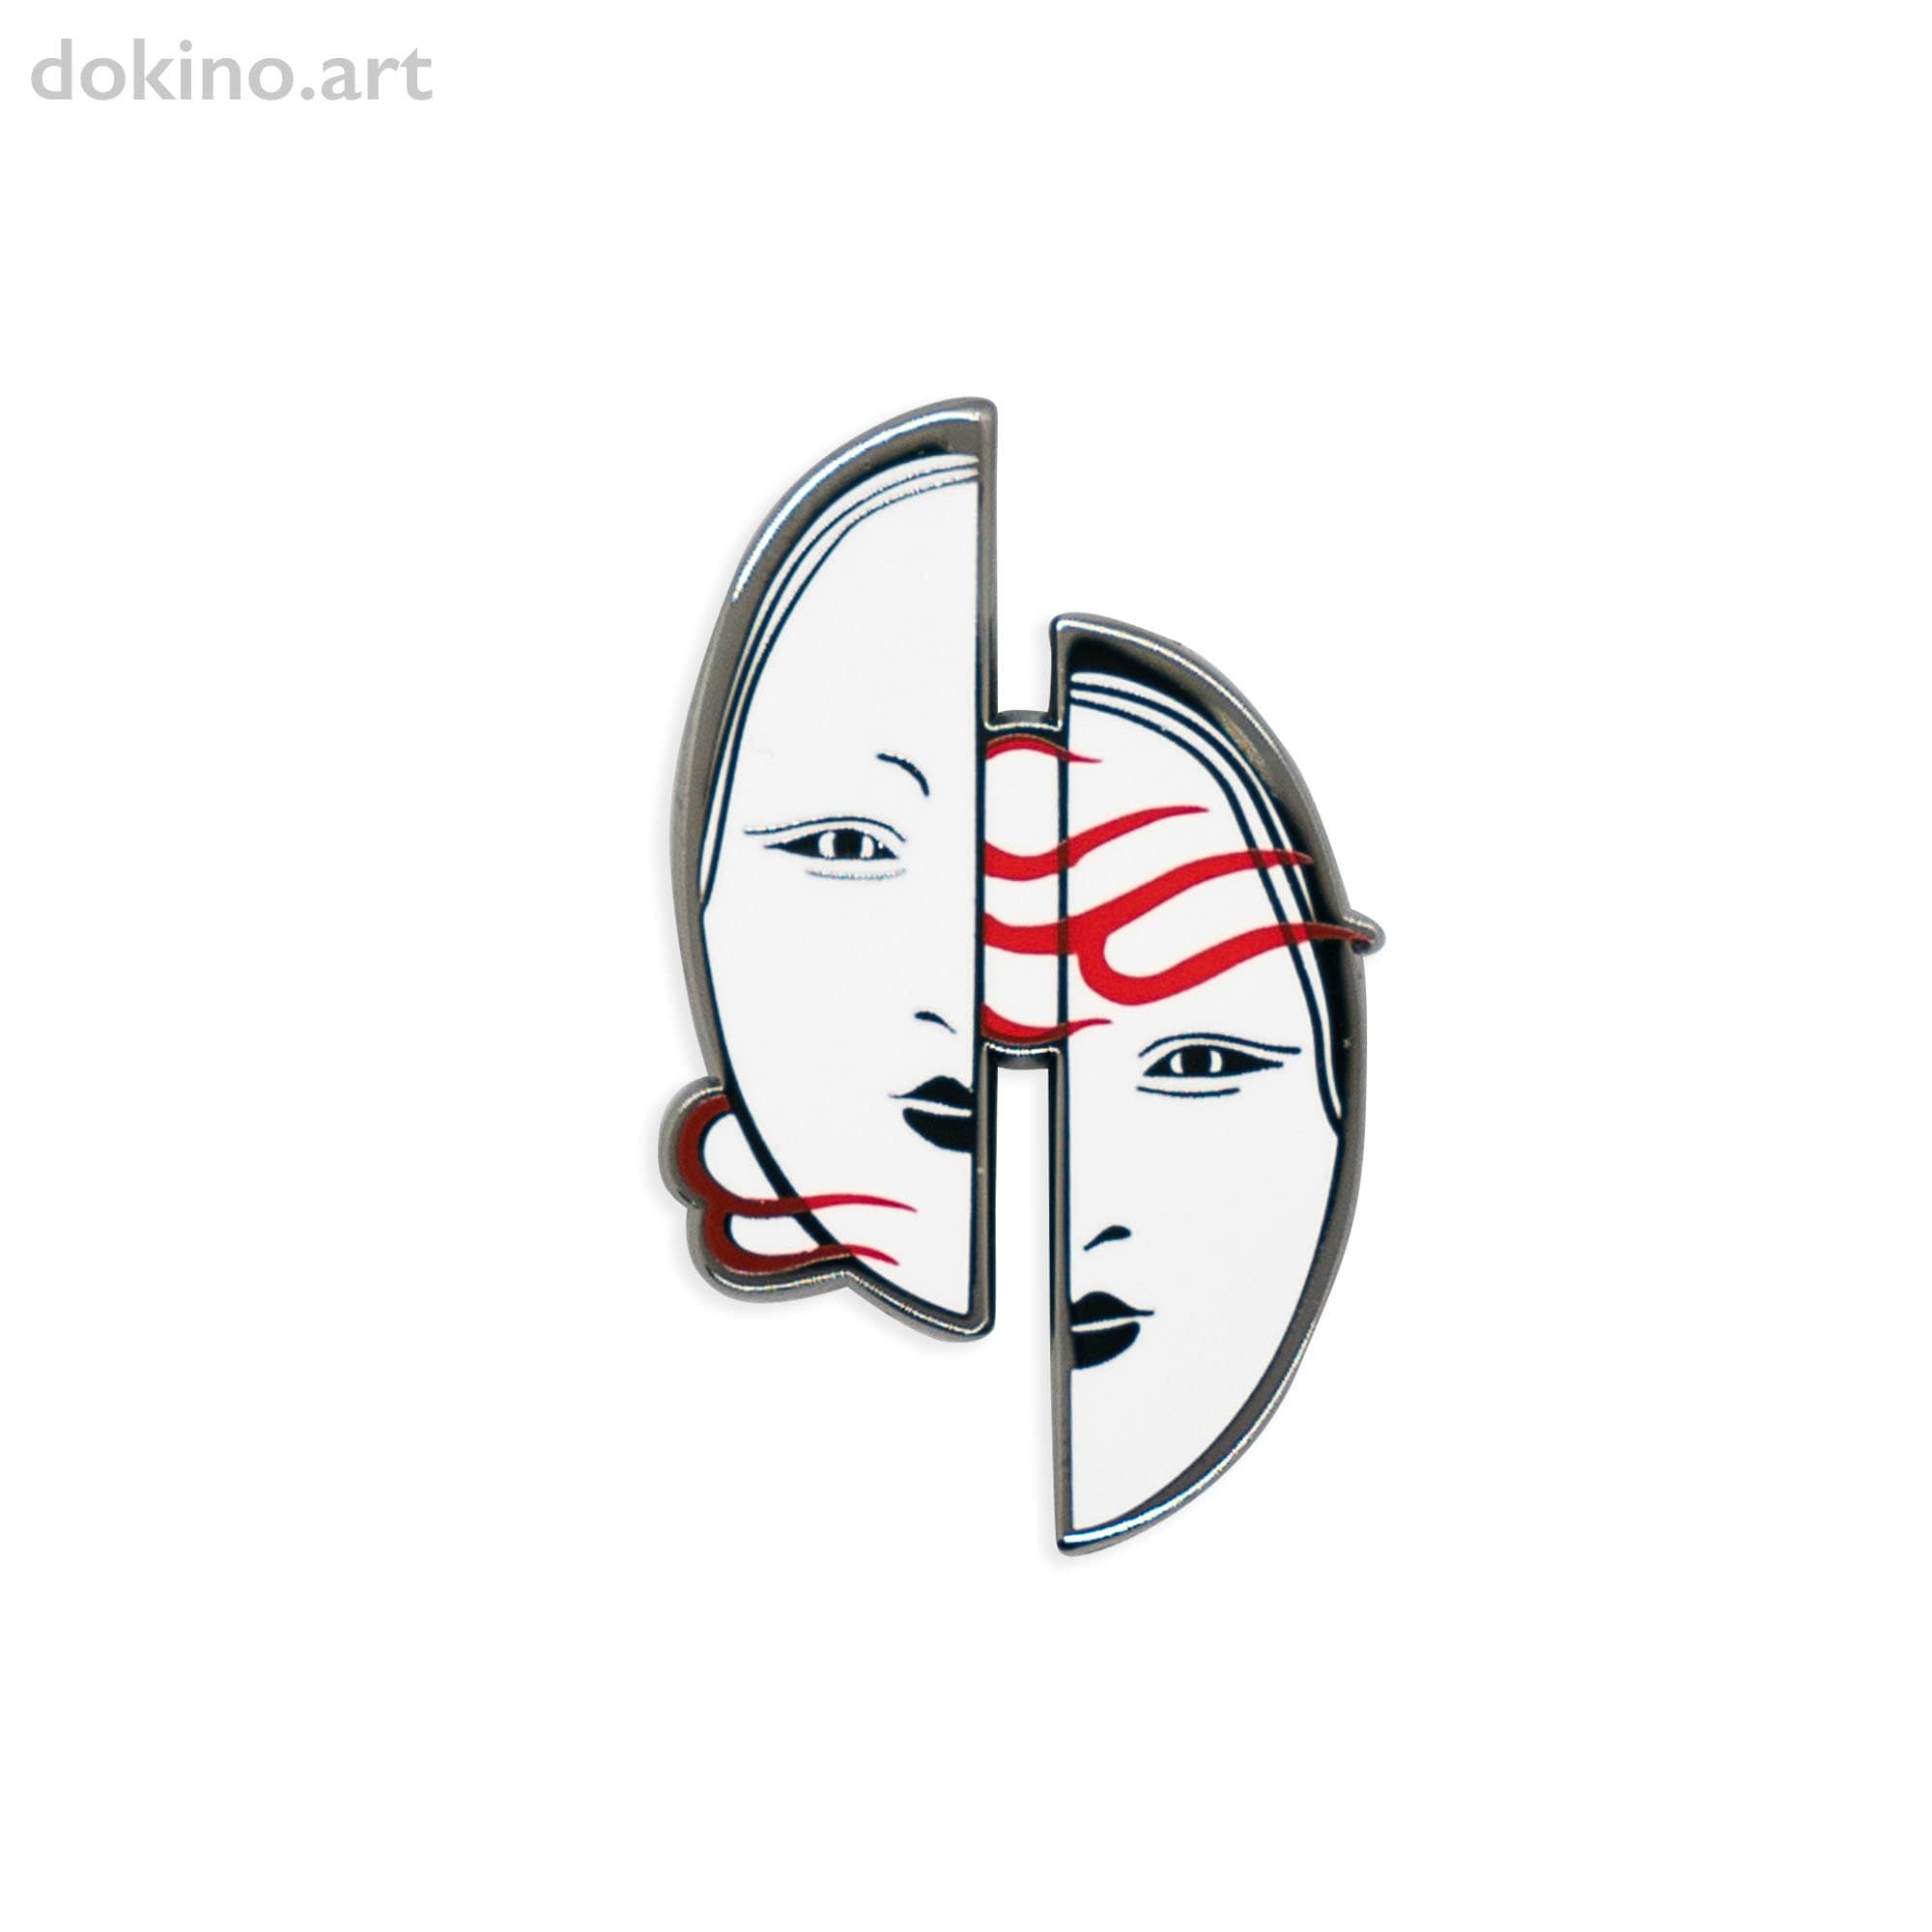 MIRROR - Japanese Tattoo Pin - Limited Edition Collaboration Monica Mo